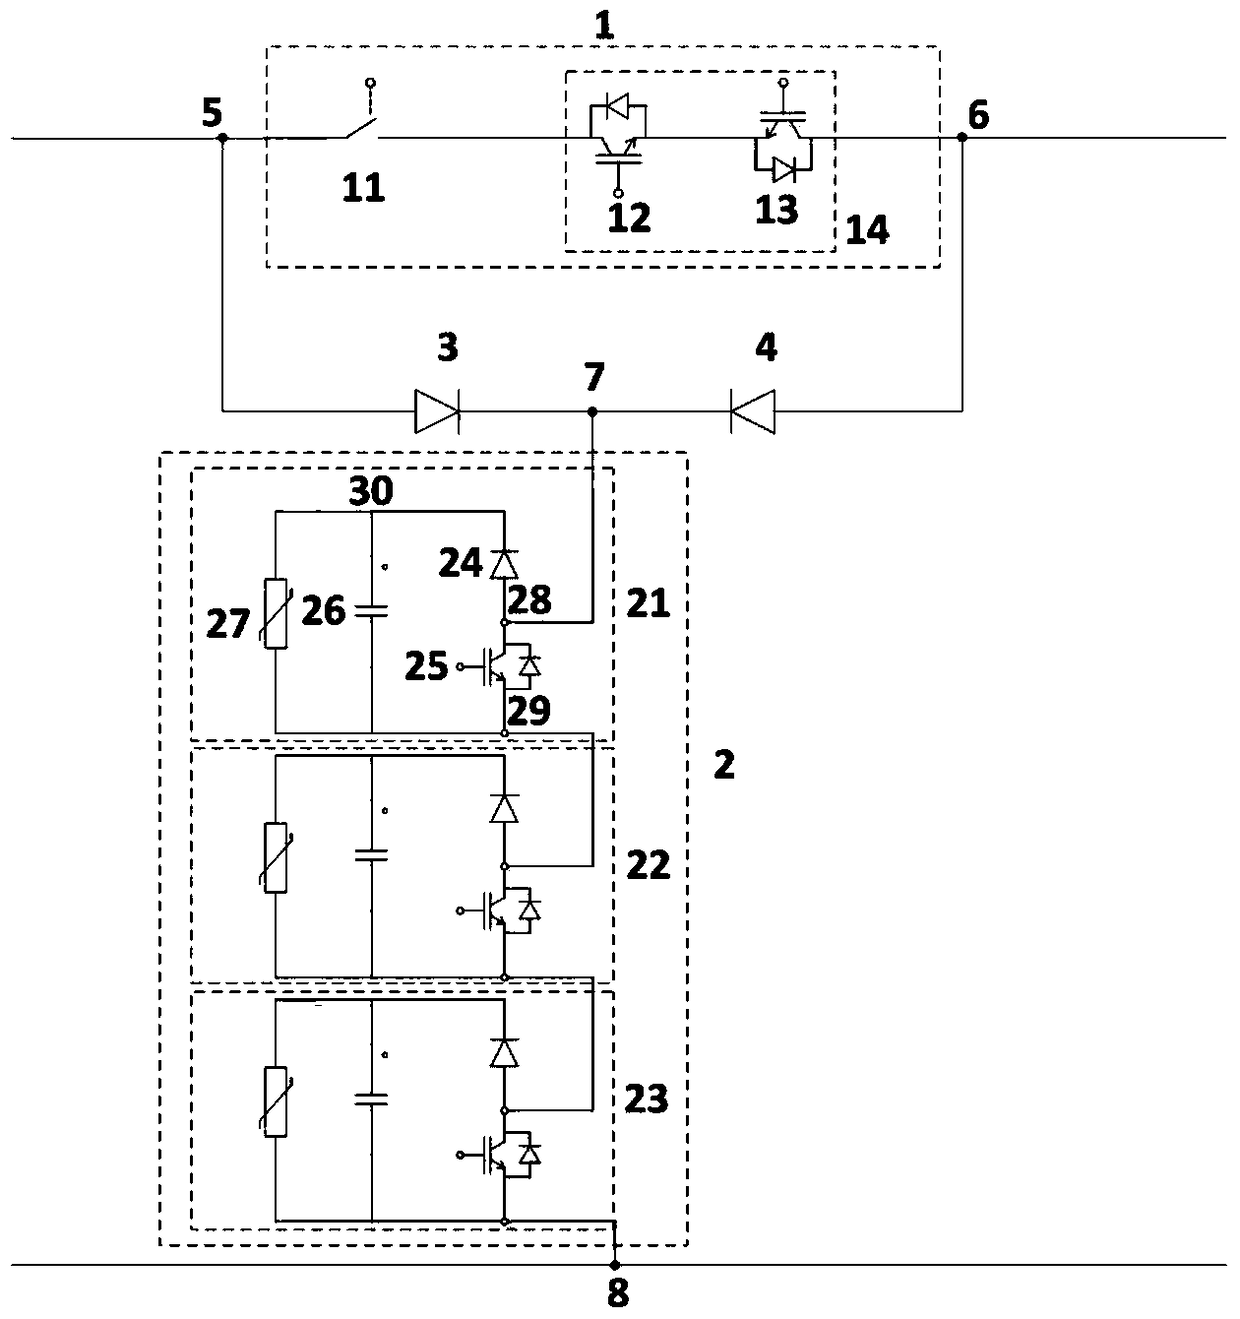 A DC circuit breaker topology with bidirectional blocking function